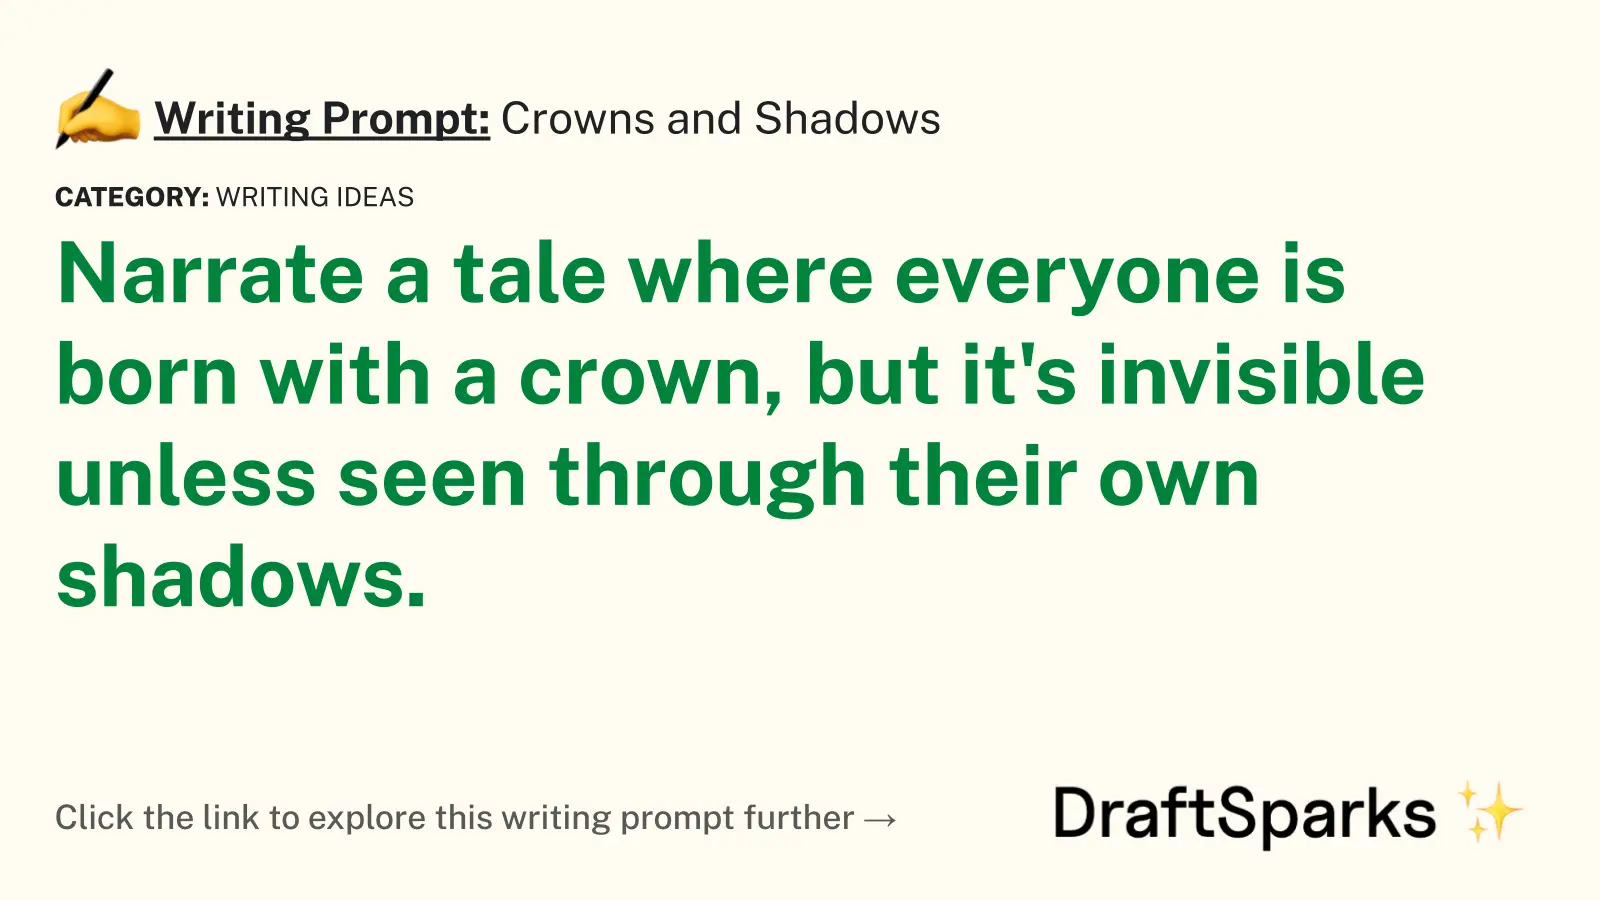 Crowns and Shadows